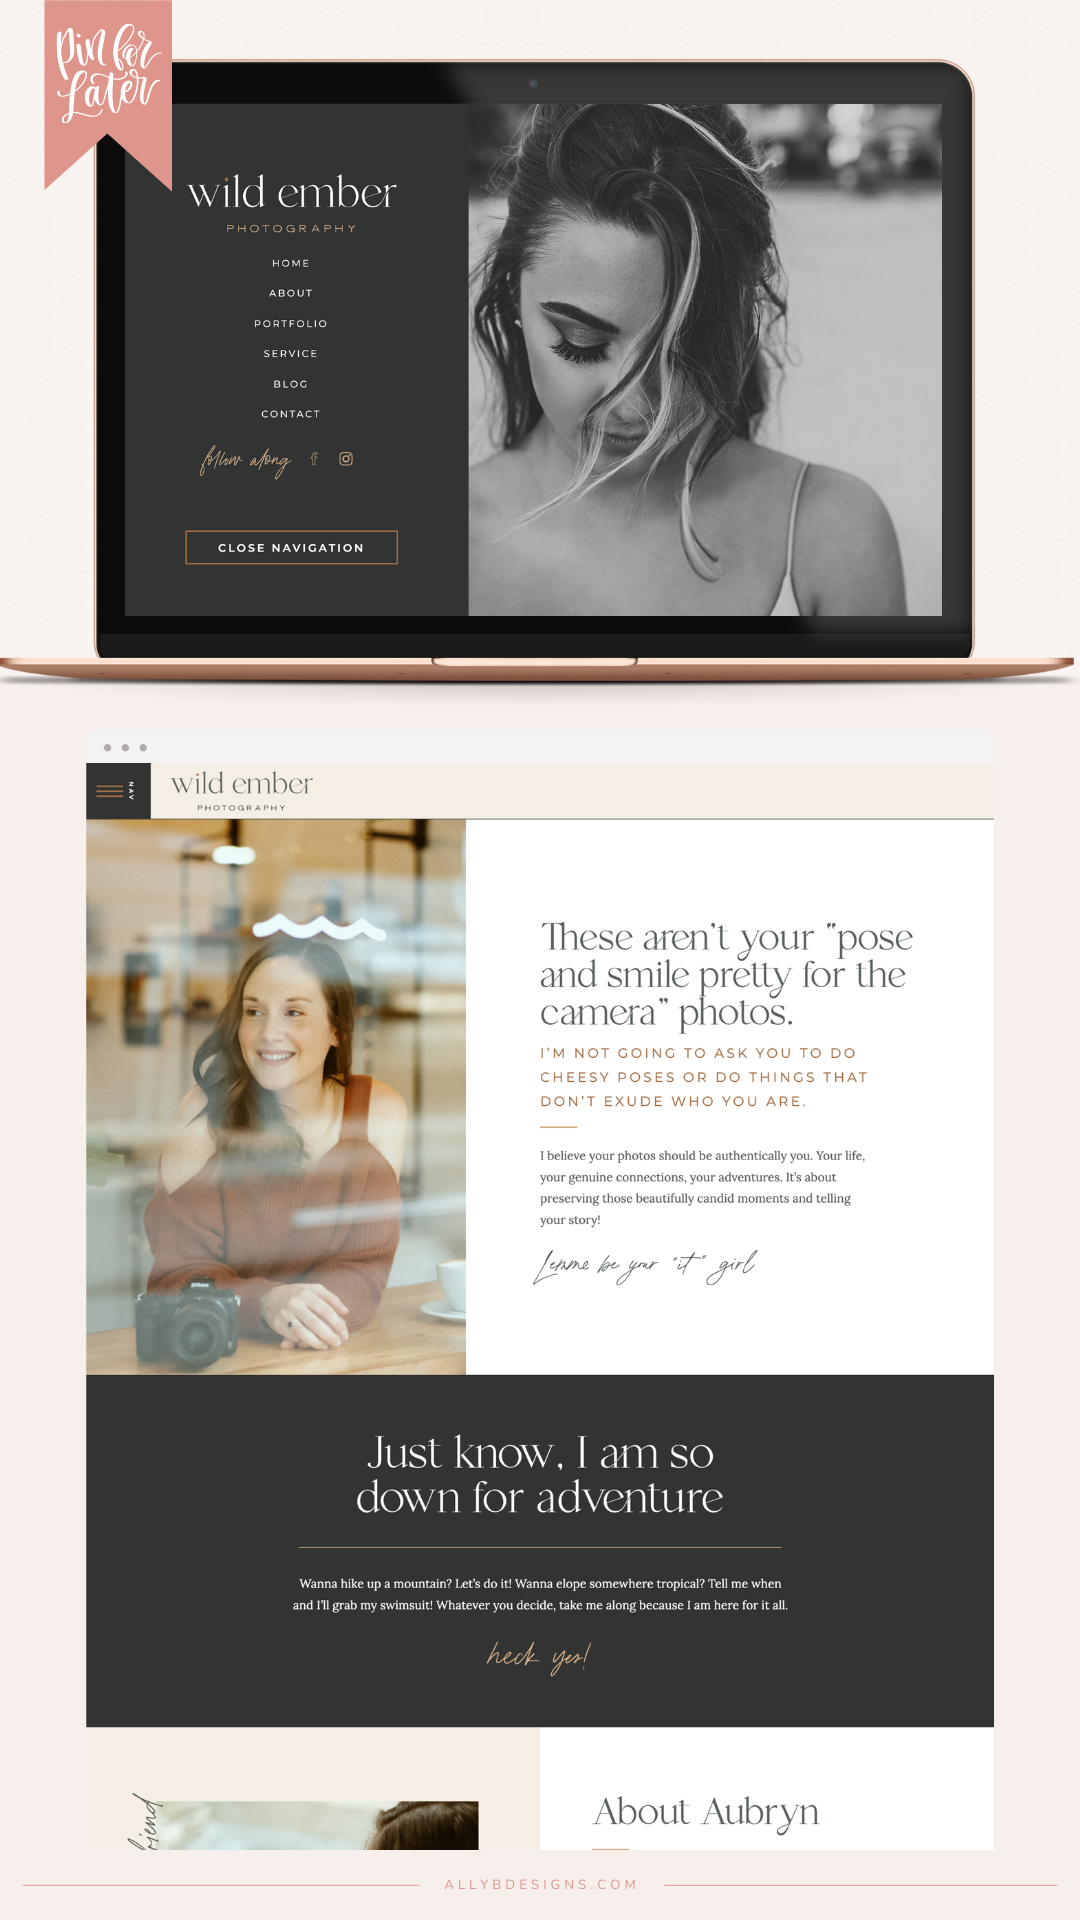 An Elopement and Wedding Photographer Website Client Launch: Wild Ember Photography. Branding and Website Design by Ally B Designs